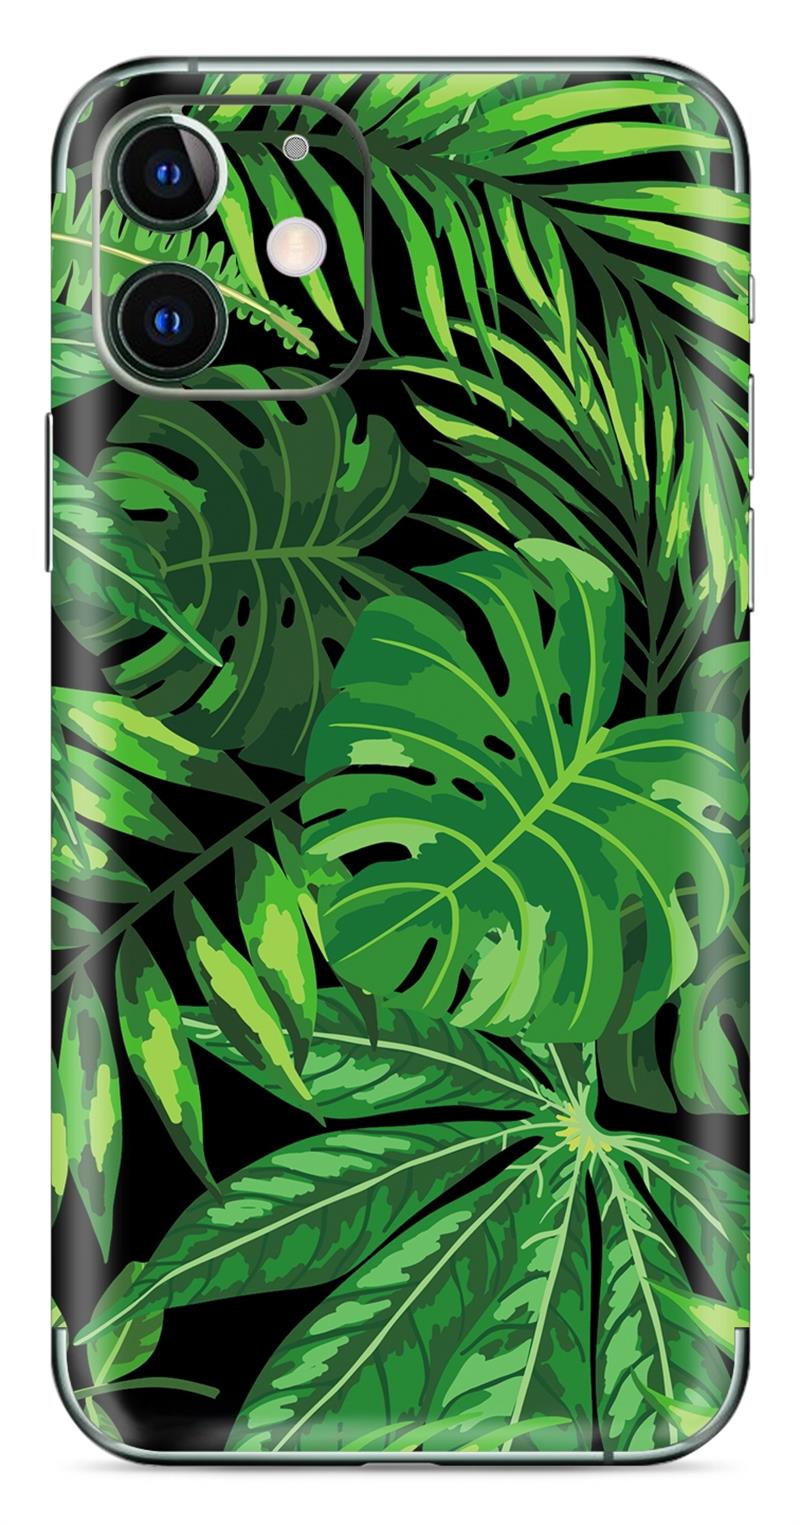 My Style PhoneSkin For Apple iPhone 11 Jungle Fever